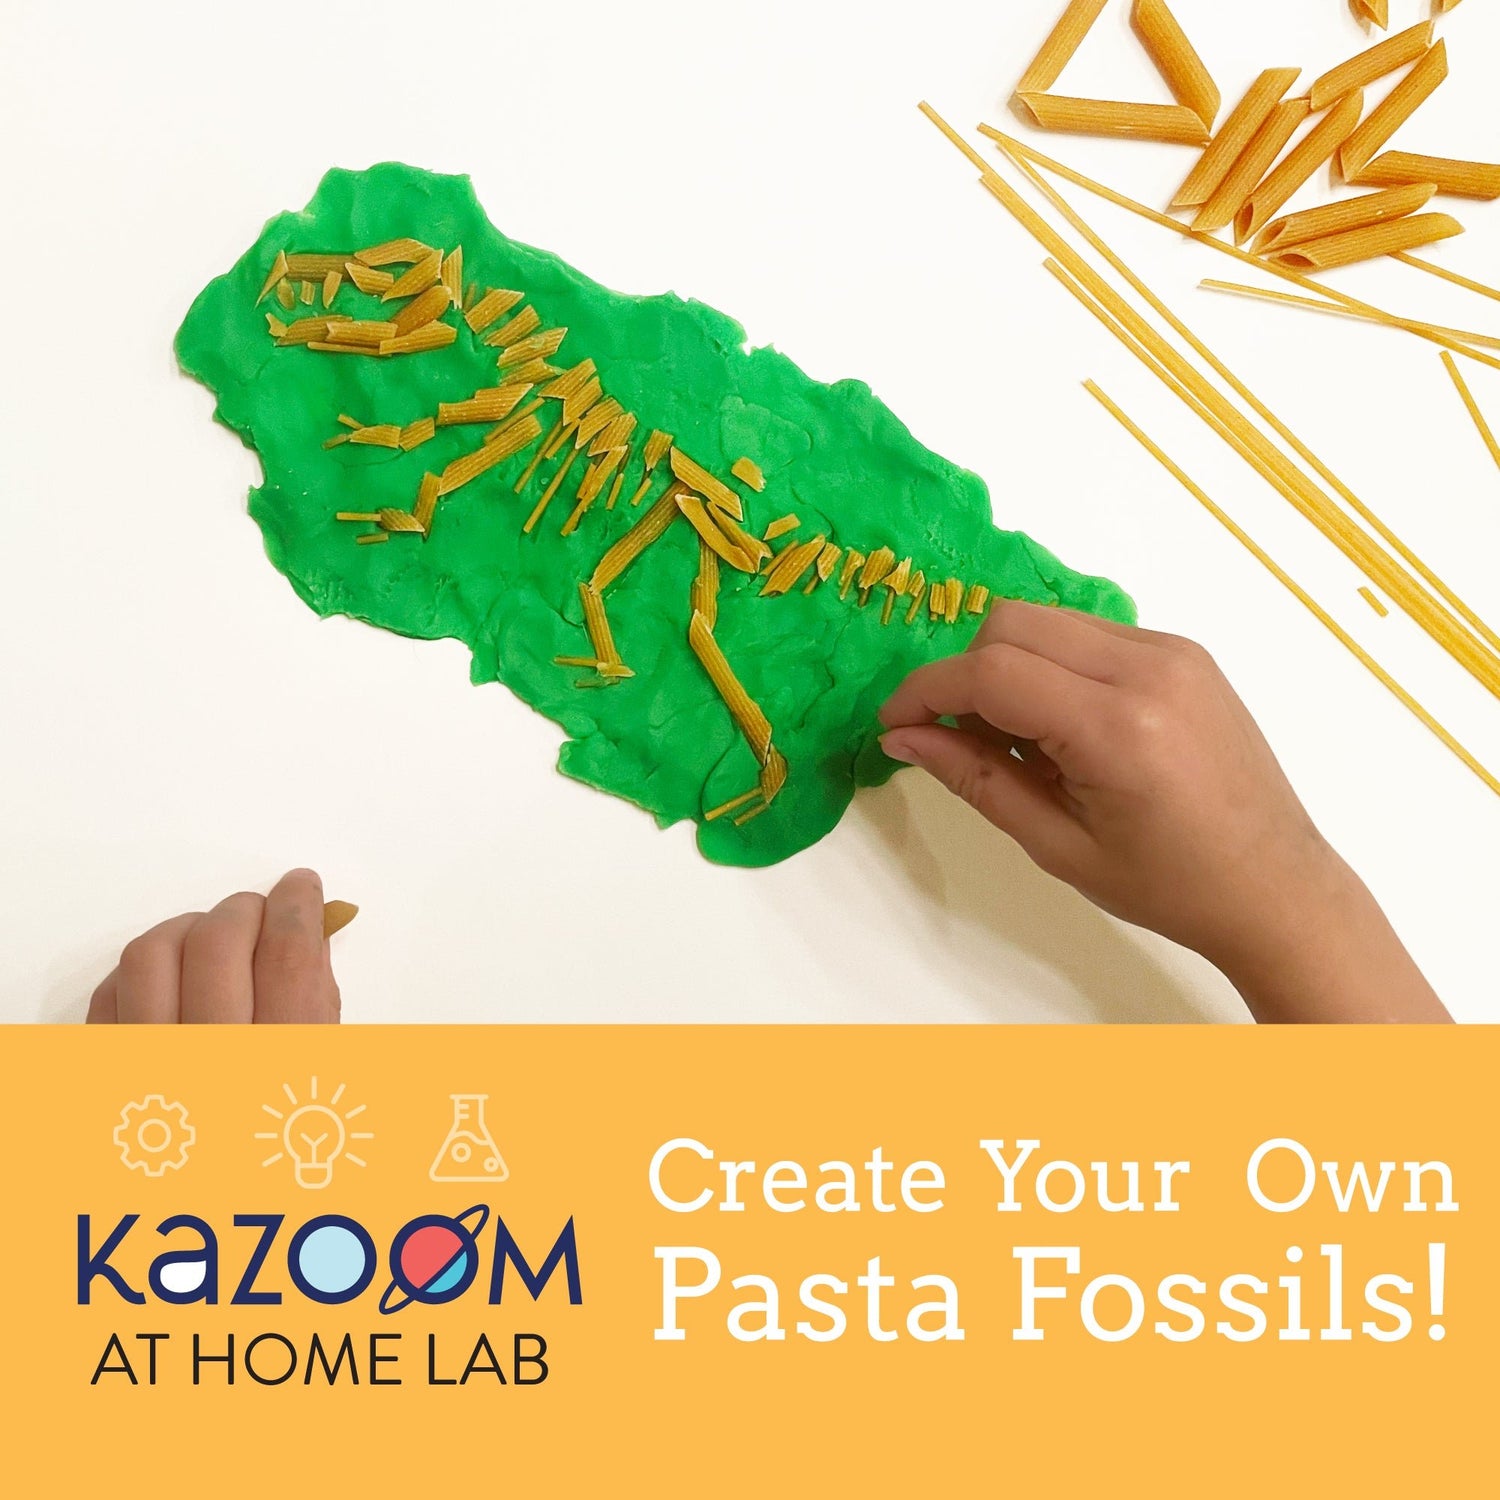 Create Your Own Pasta Fossils